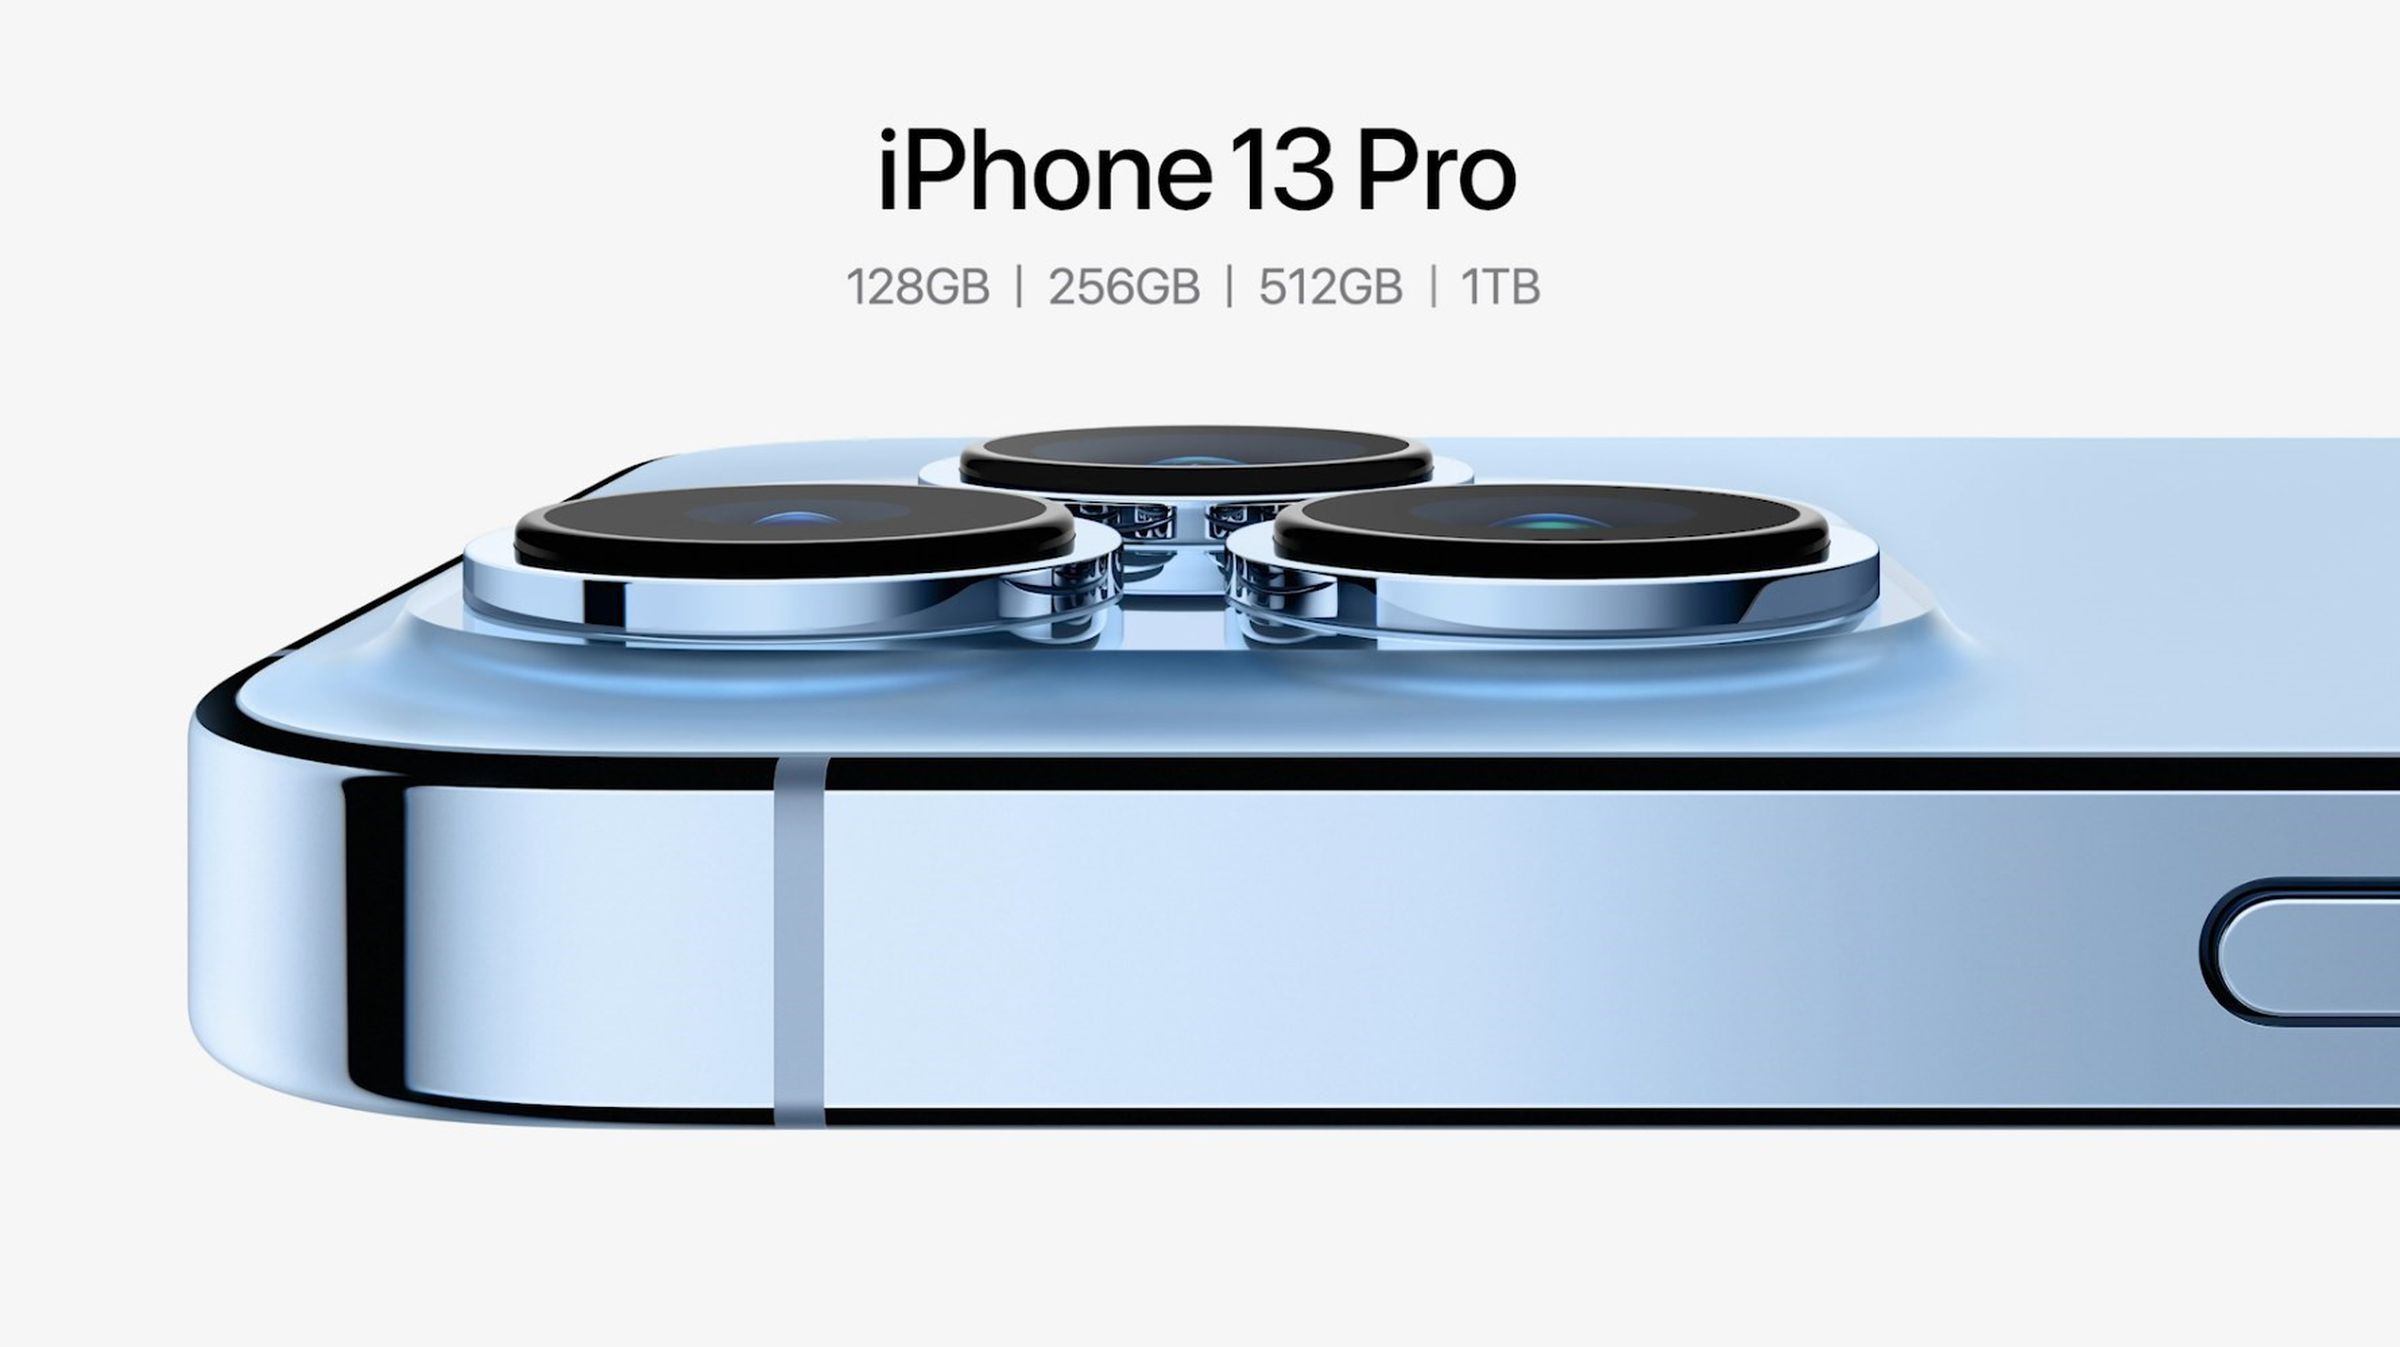 Many of the carrier trade-in offers are so aggressive that you can get an iPhone 13 Pro for “free.”